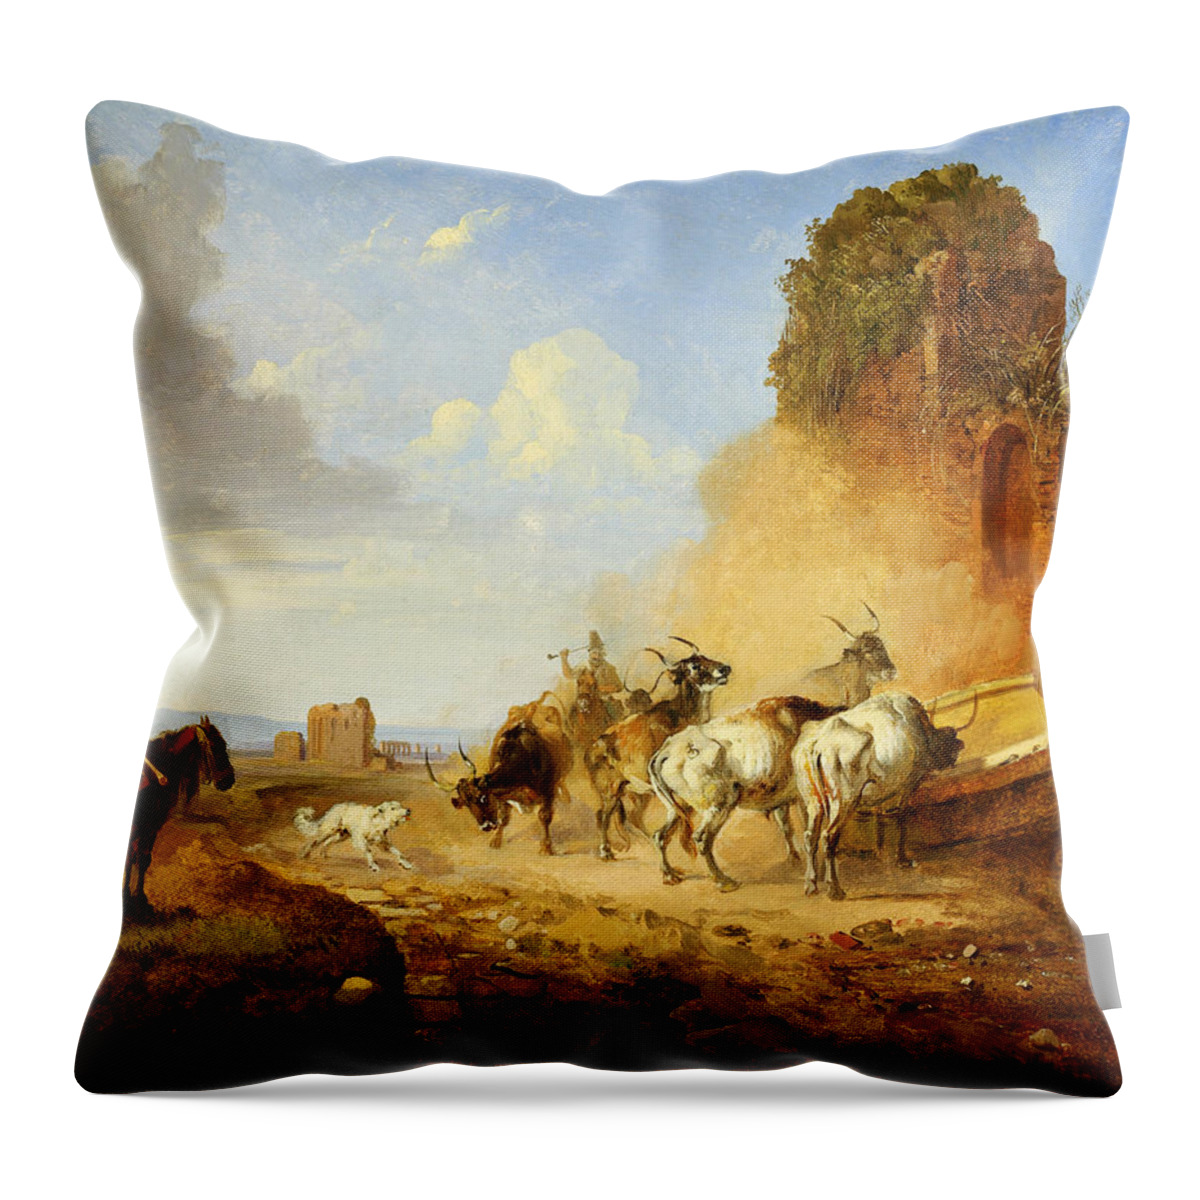 Heinrich Burkel Cattle Watering At A Fountain On The Via Appia A Tiqua Throw Pillow featuring the painting Heinrich Burkel Cattle Watering at a Fountain on the Via Appia A tiqua by MotionAge Designs